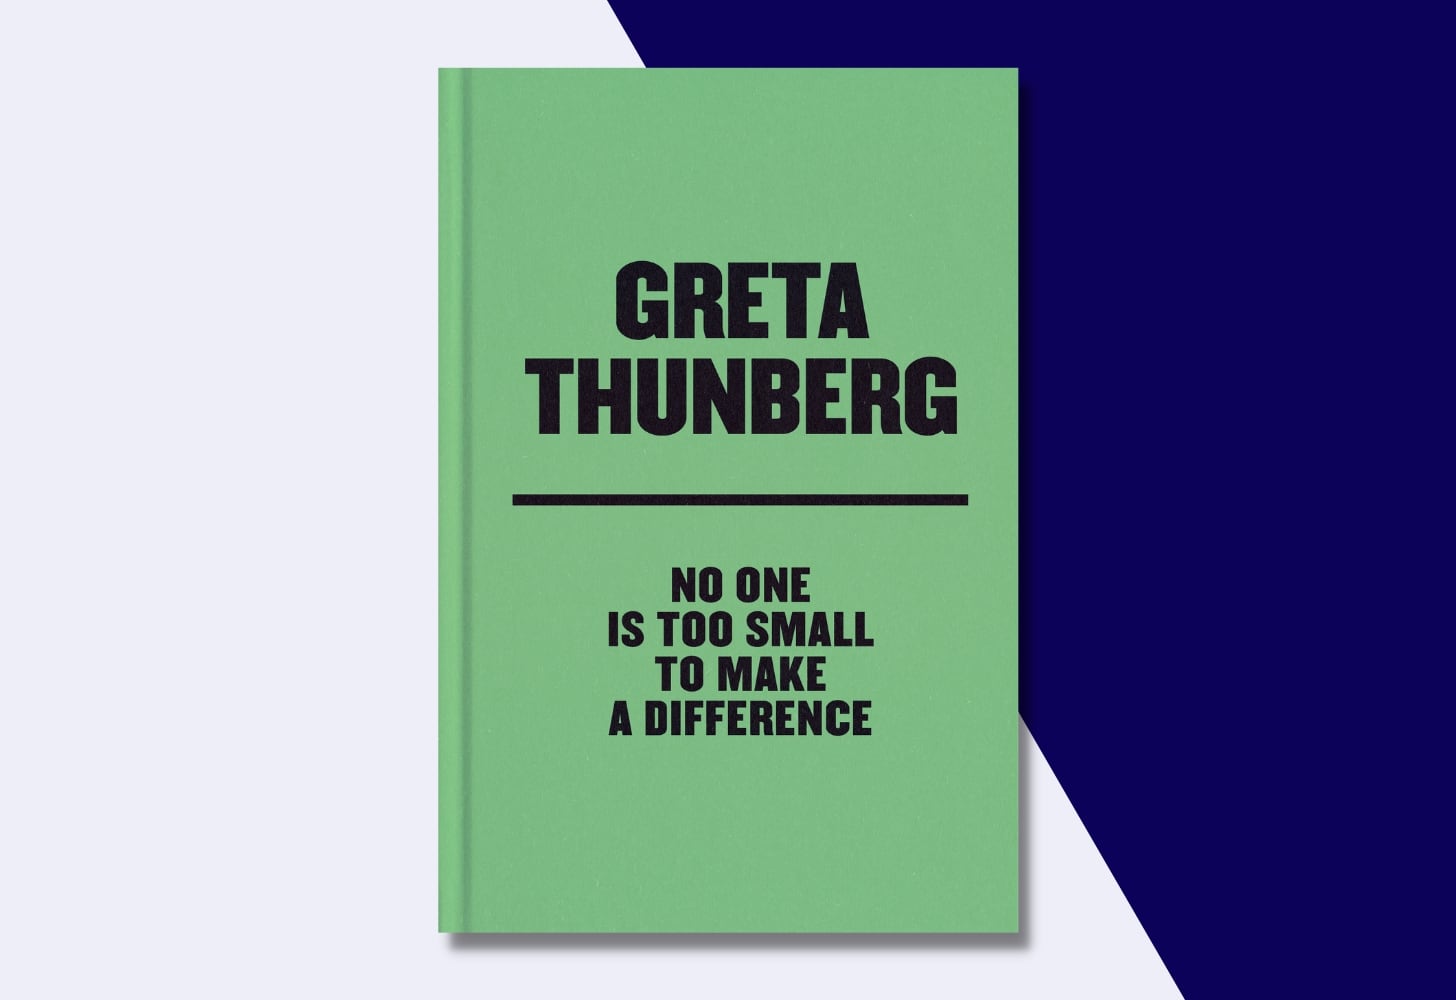 “No One Is Too Small to Make a Difference” by Greta Thunberg